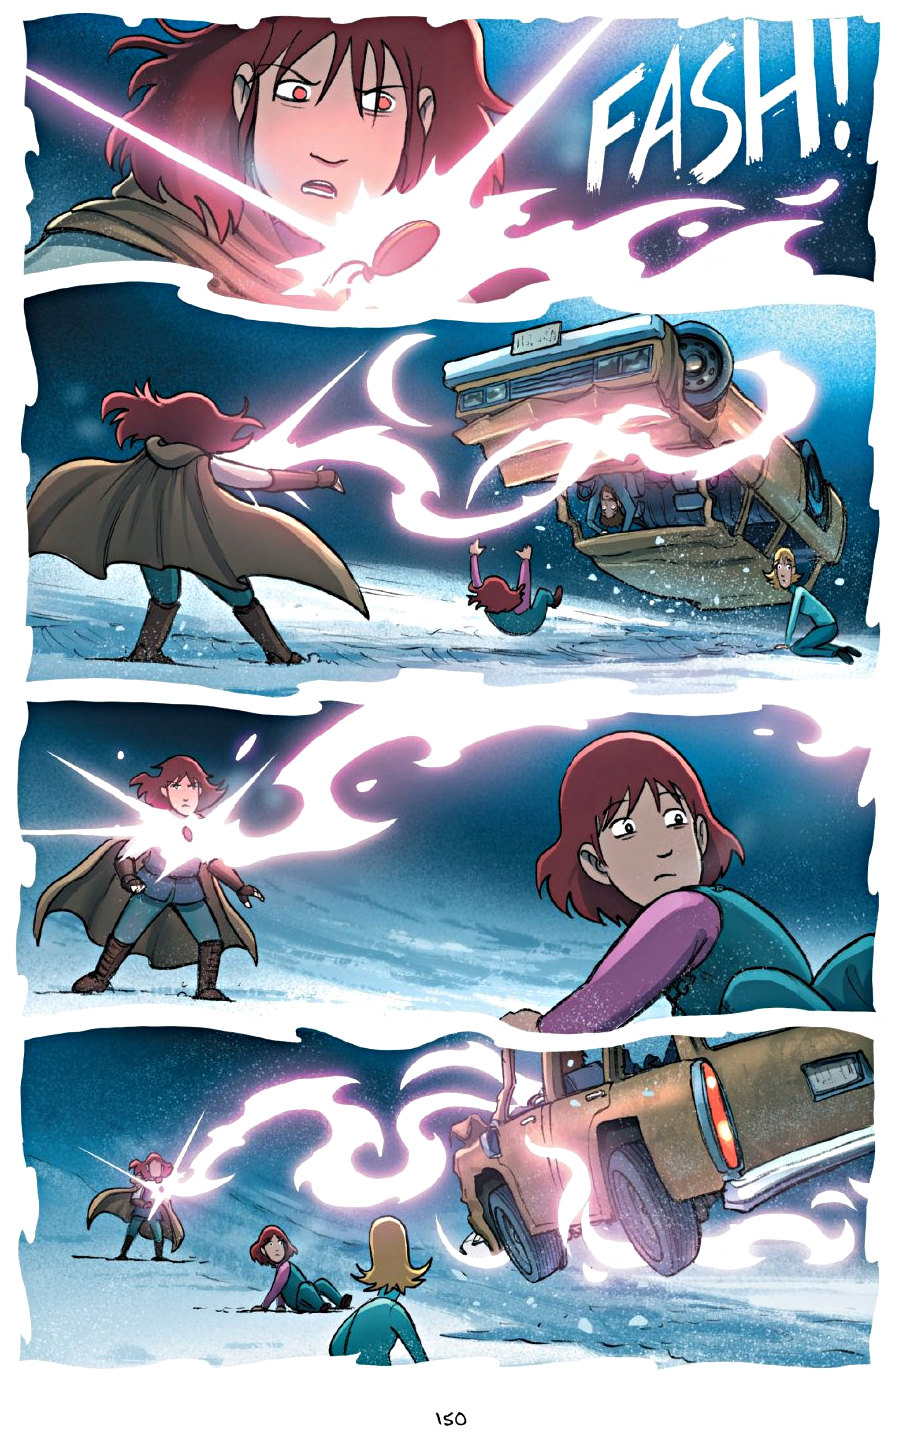 page 150 of amulet 7 firelight graphic novel